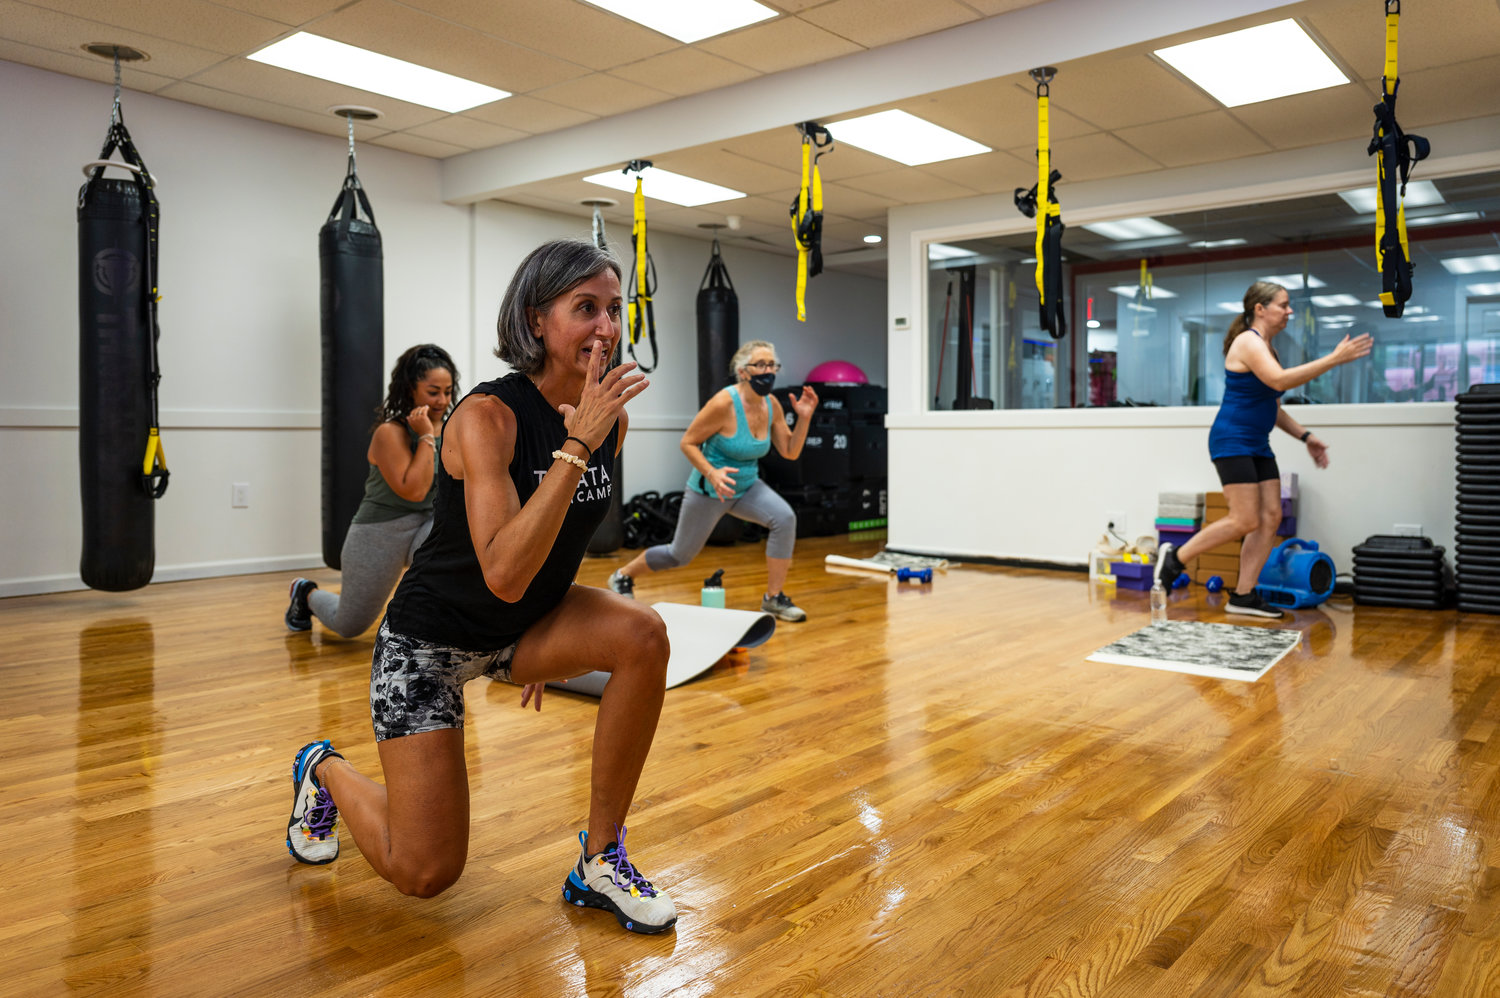 The Female Fight Club’s new studio, at 5919 Riverdale Ave., offers, a variety of classes including kickboxing, Pilates and Zumba. Joanna Edmondson says she founded the club when the coronavirus pandemic hit the city last year as a way to give women a safe space to work out together.